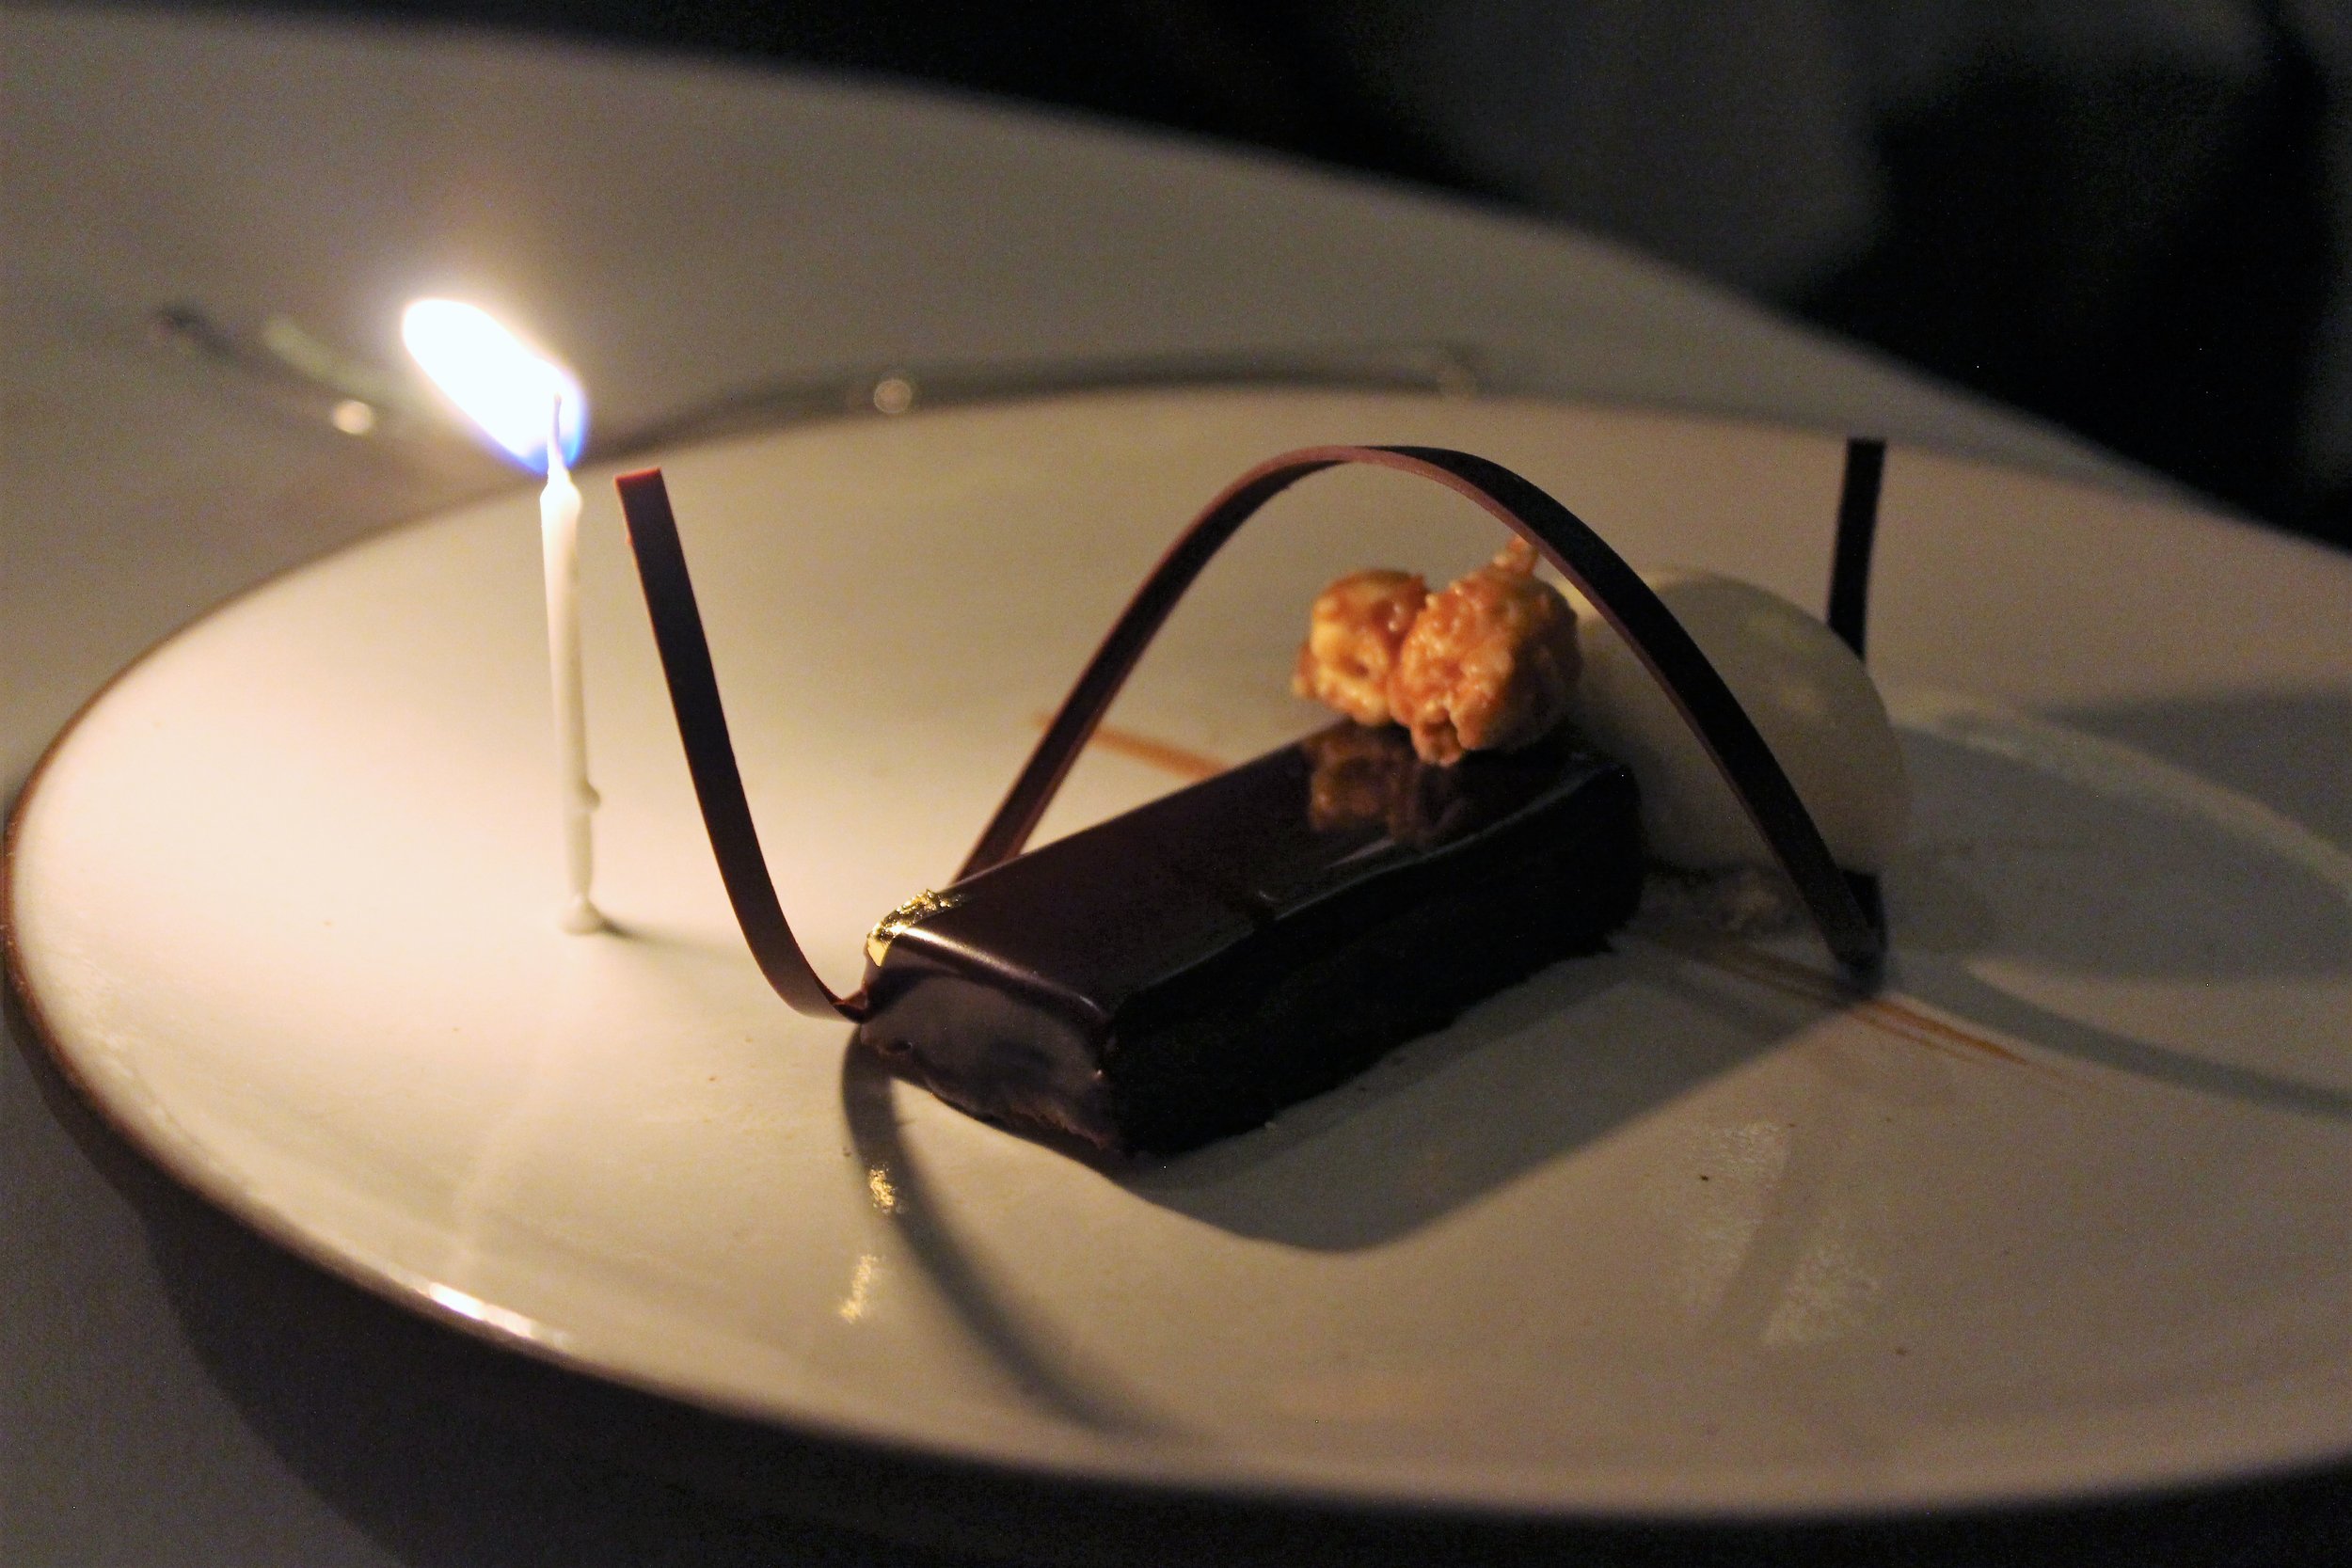 2008 Chocolate Palette with Peanut Butter and Popcorn Ice Cream at EMP in New York City